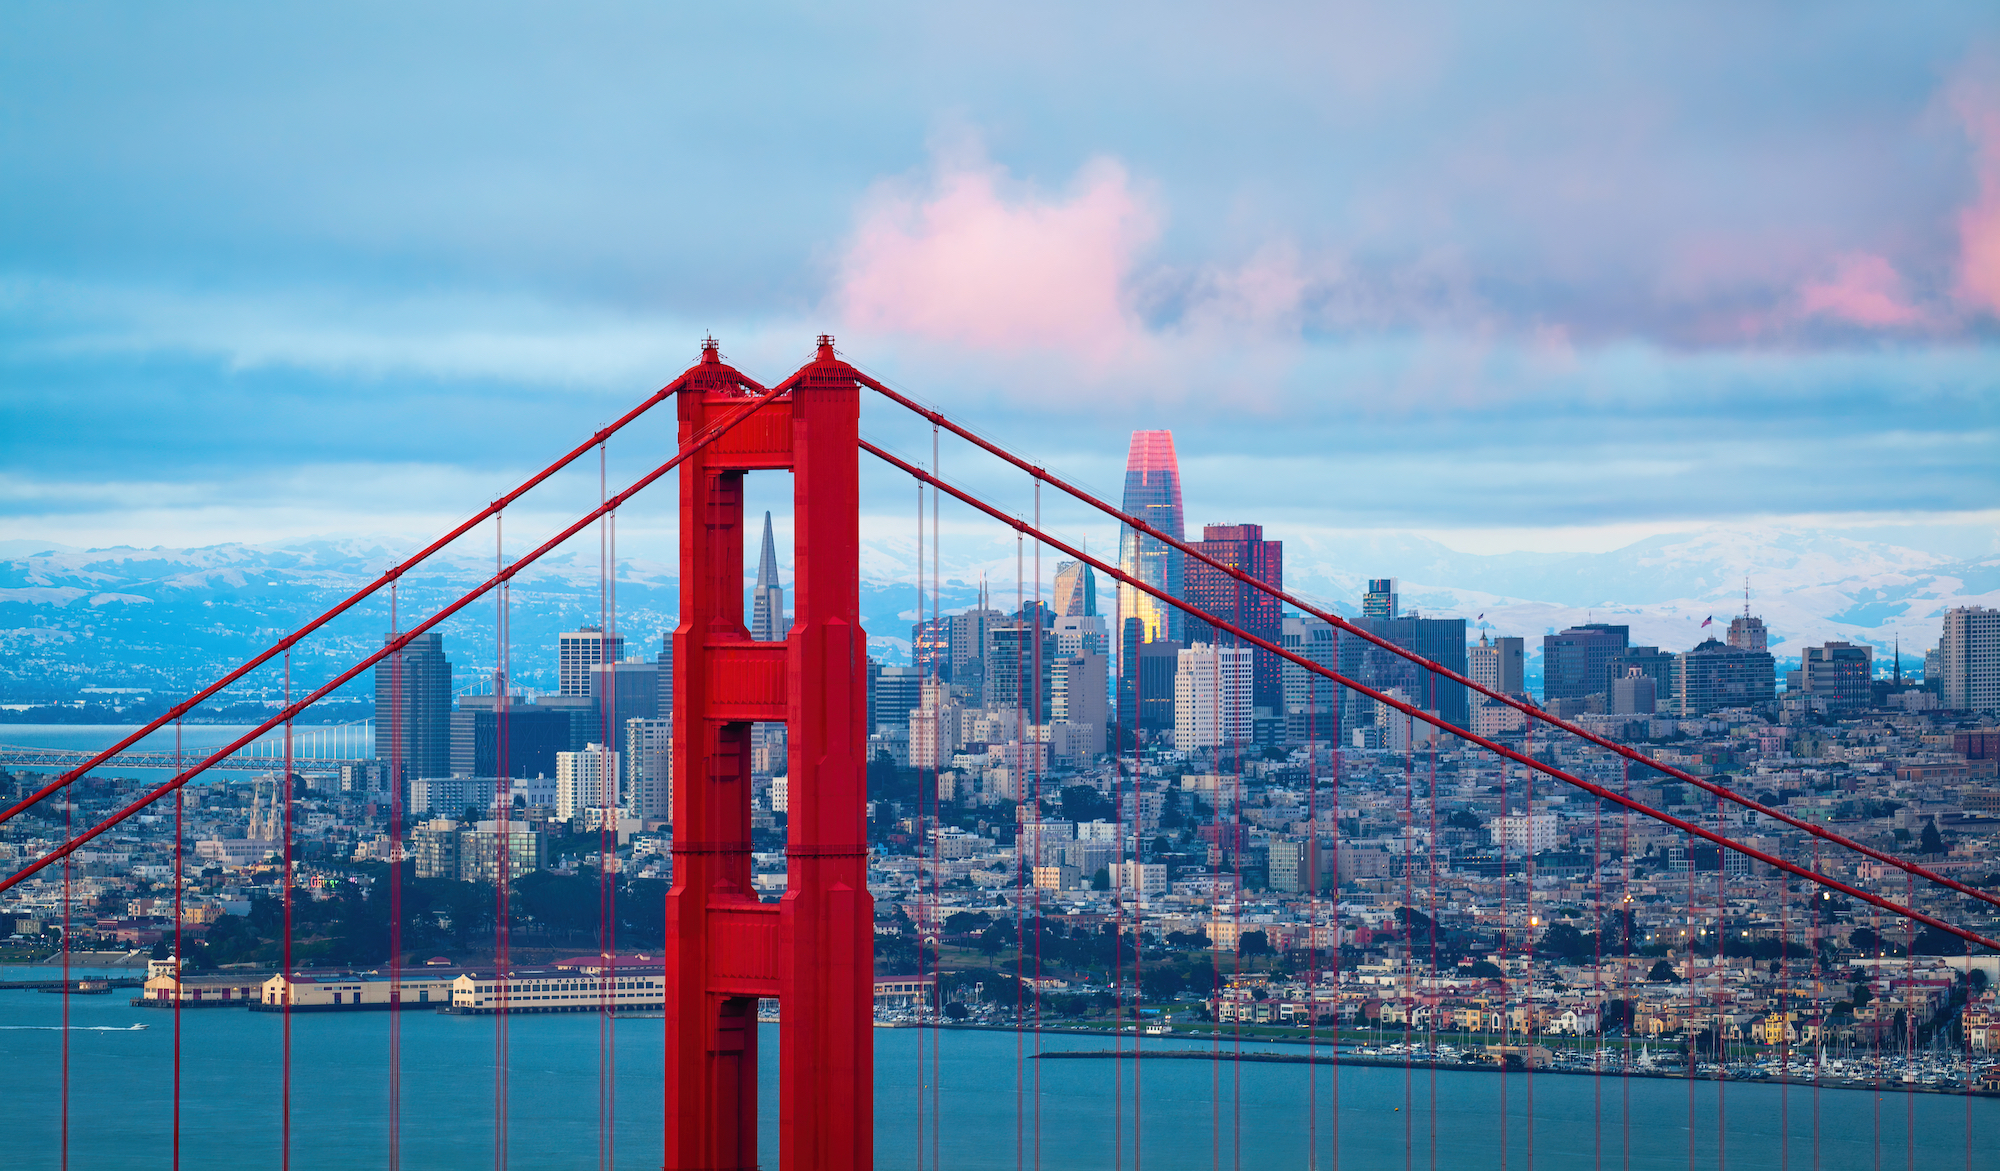 The golden gate bridge is pictured in front of the SF skyline.